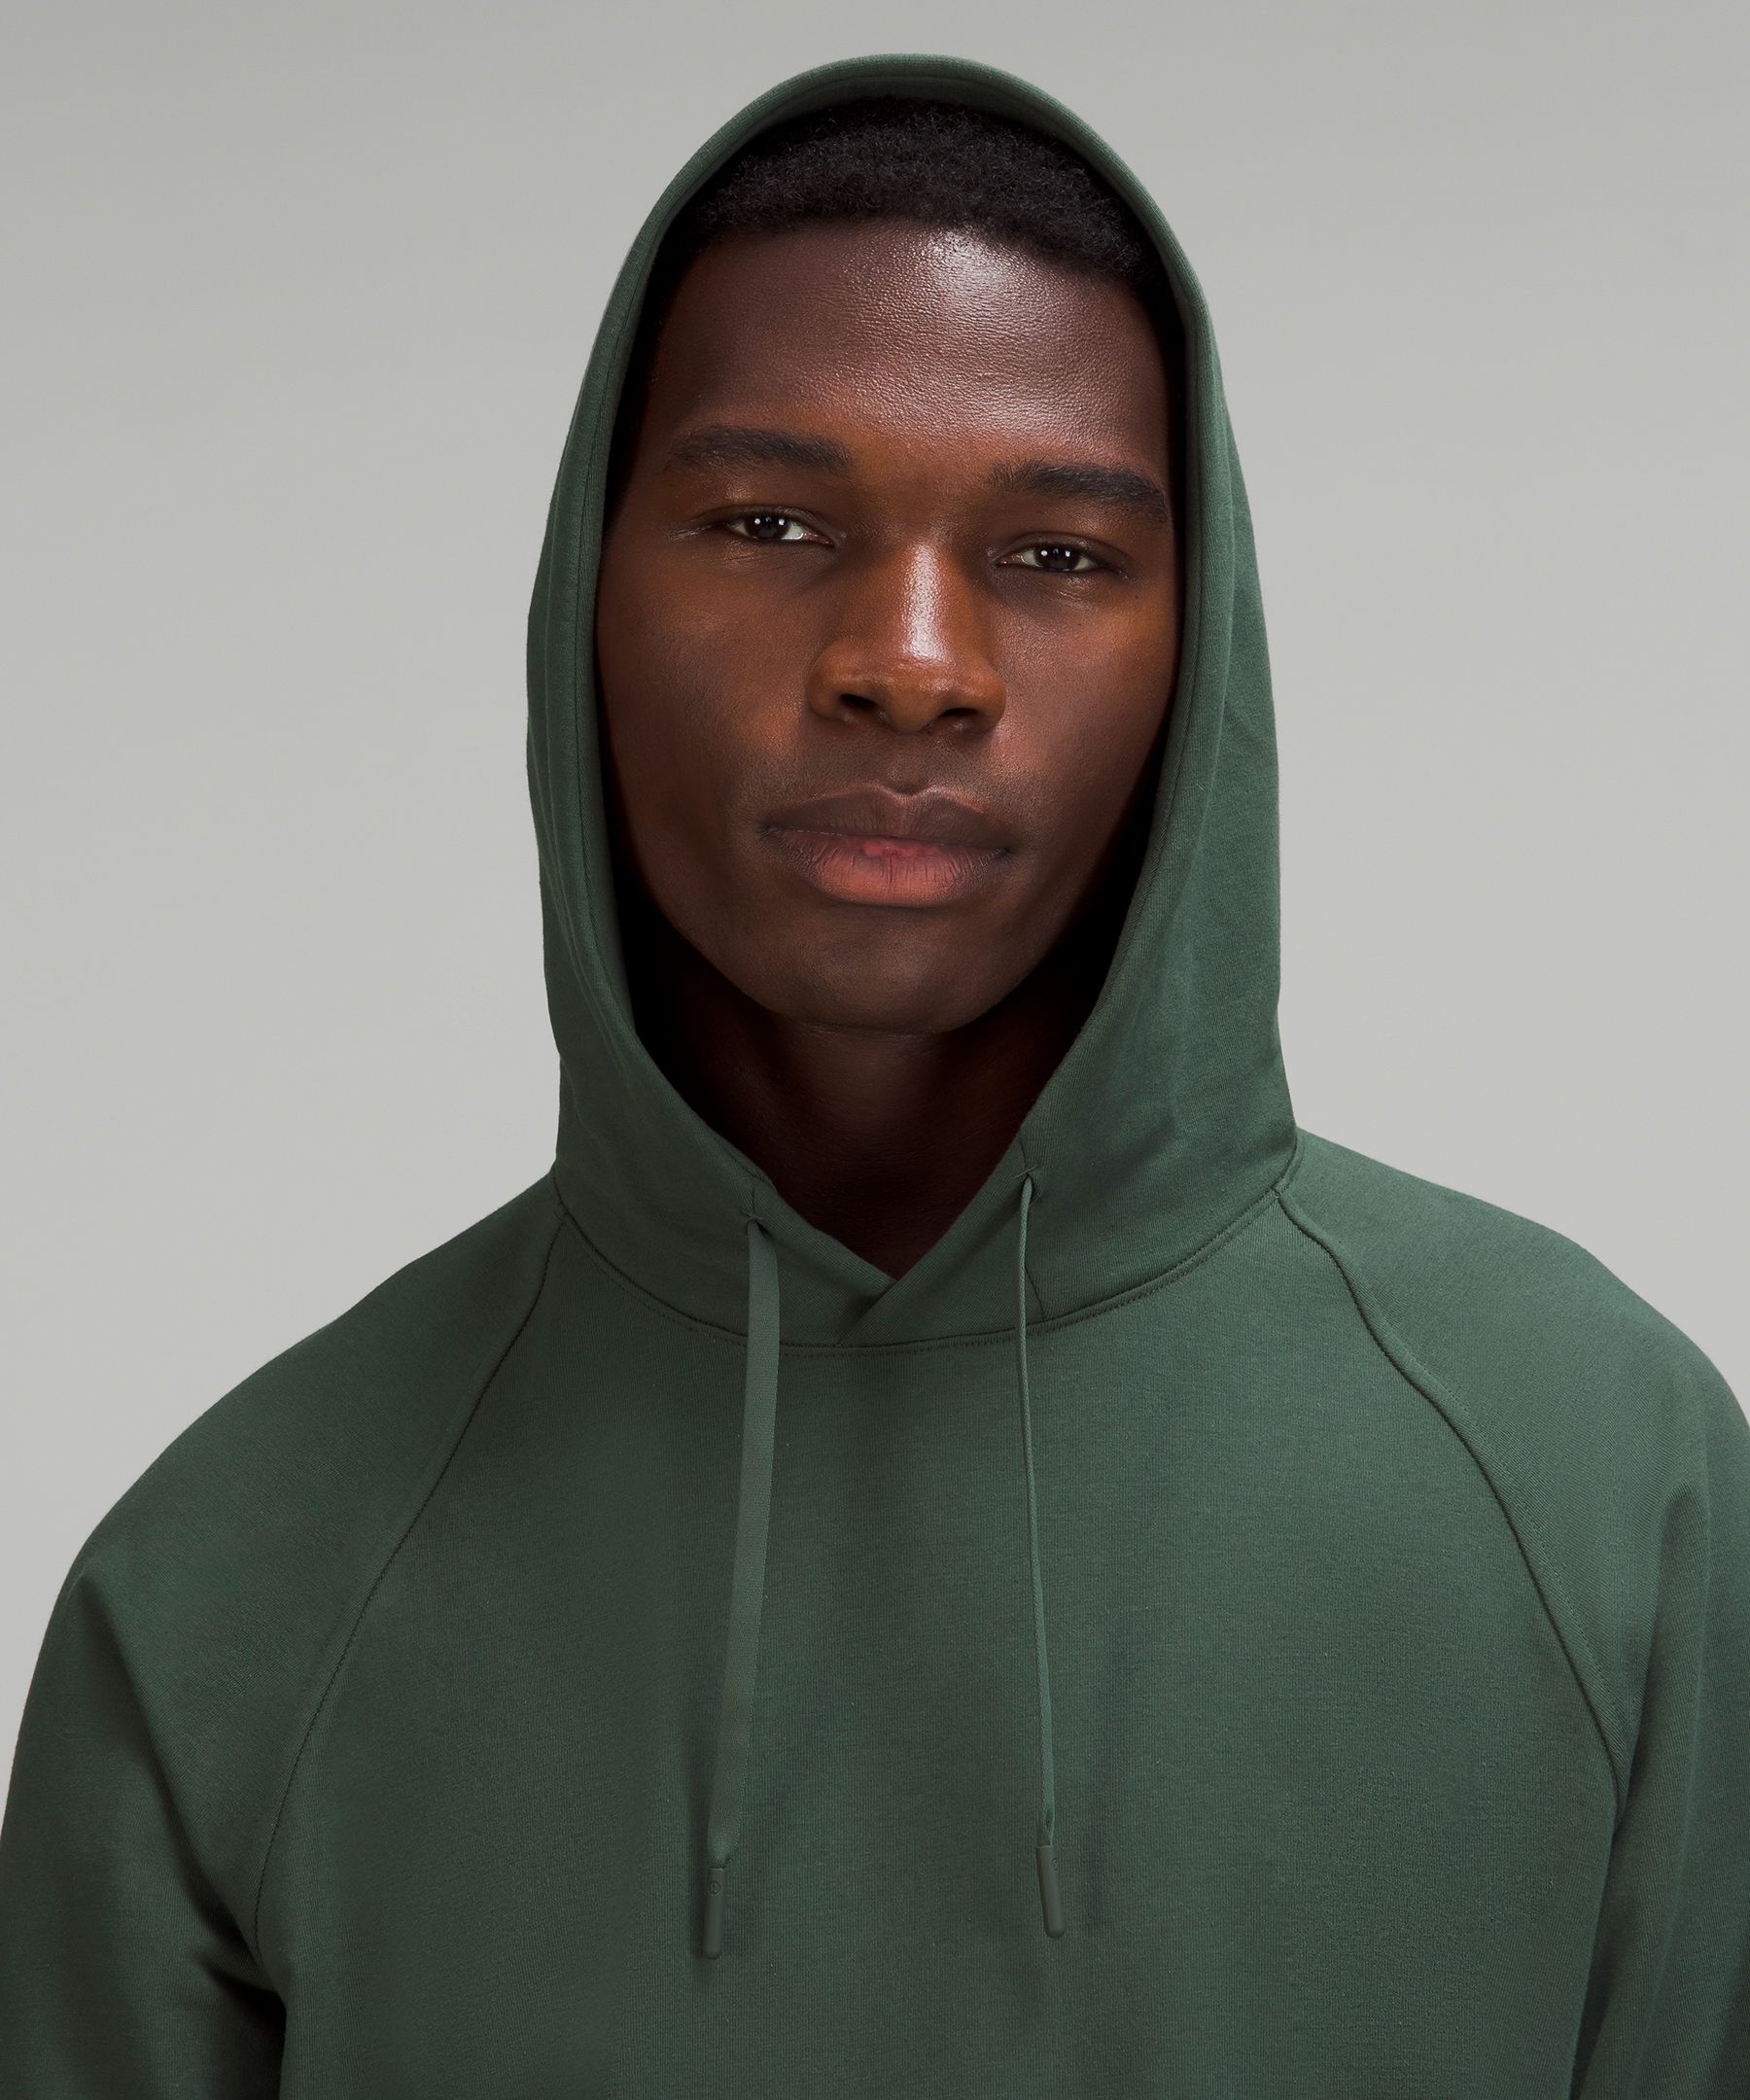 sell] Lululemon City Sweat Pullover Hoodie - NWT $59 shipped (each) Size: M  : r/lululemonBST